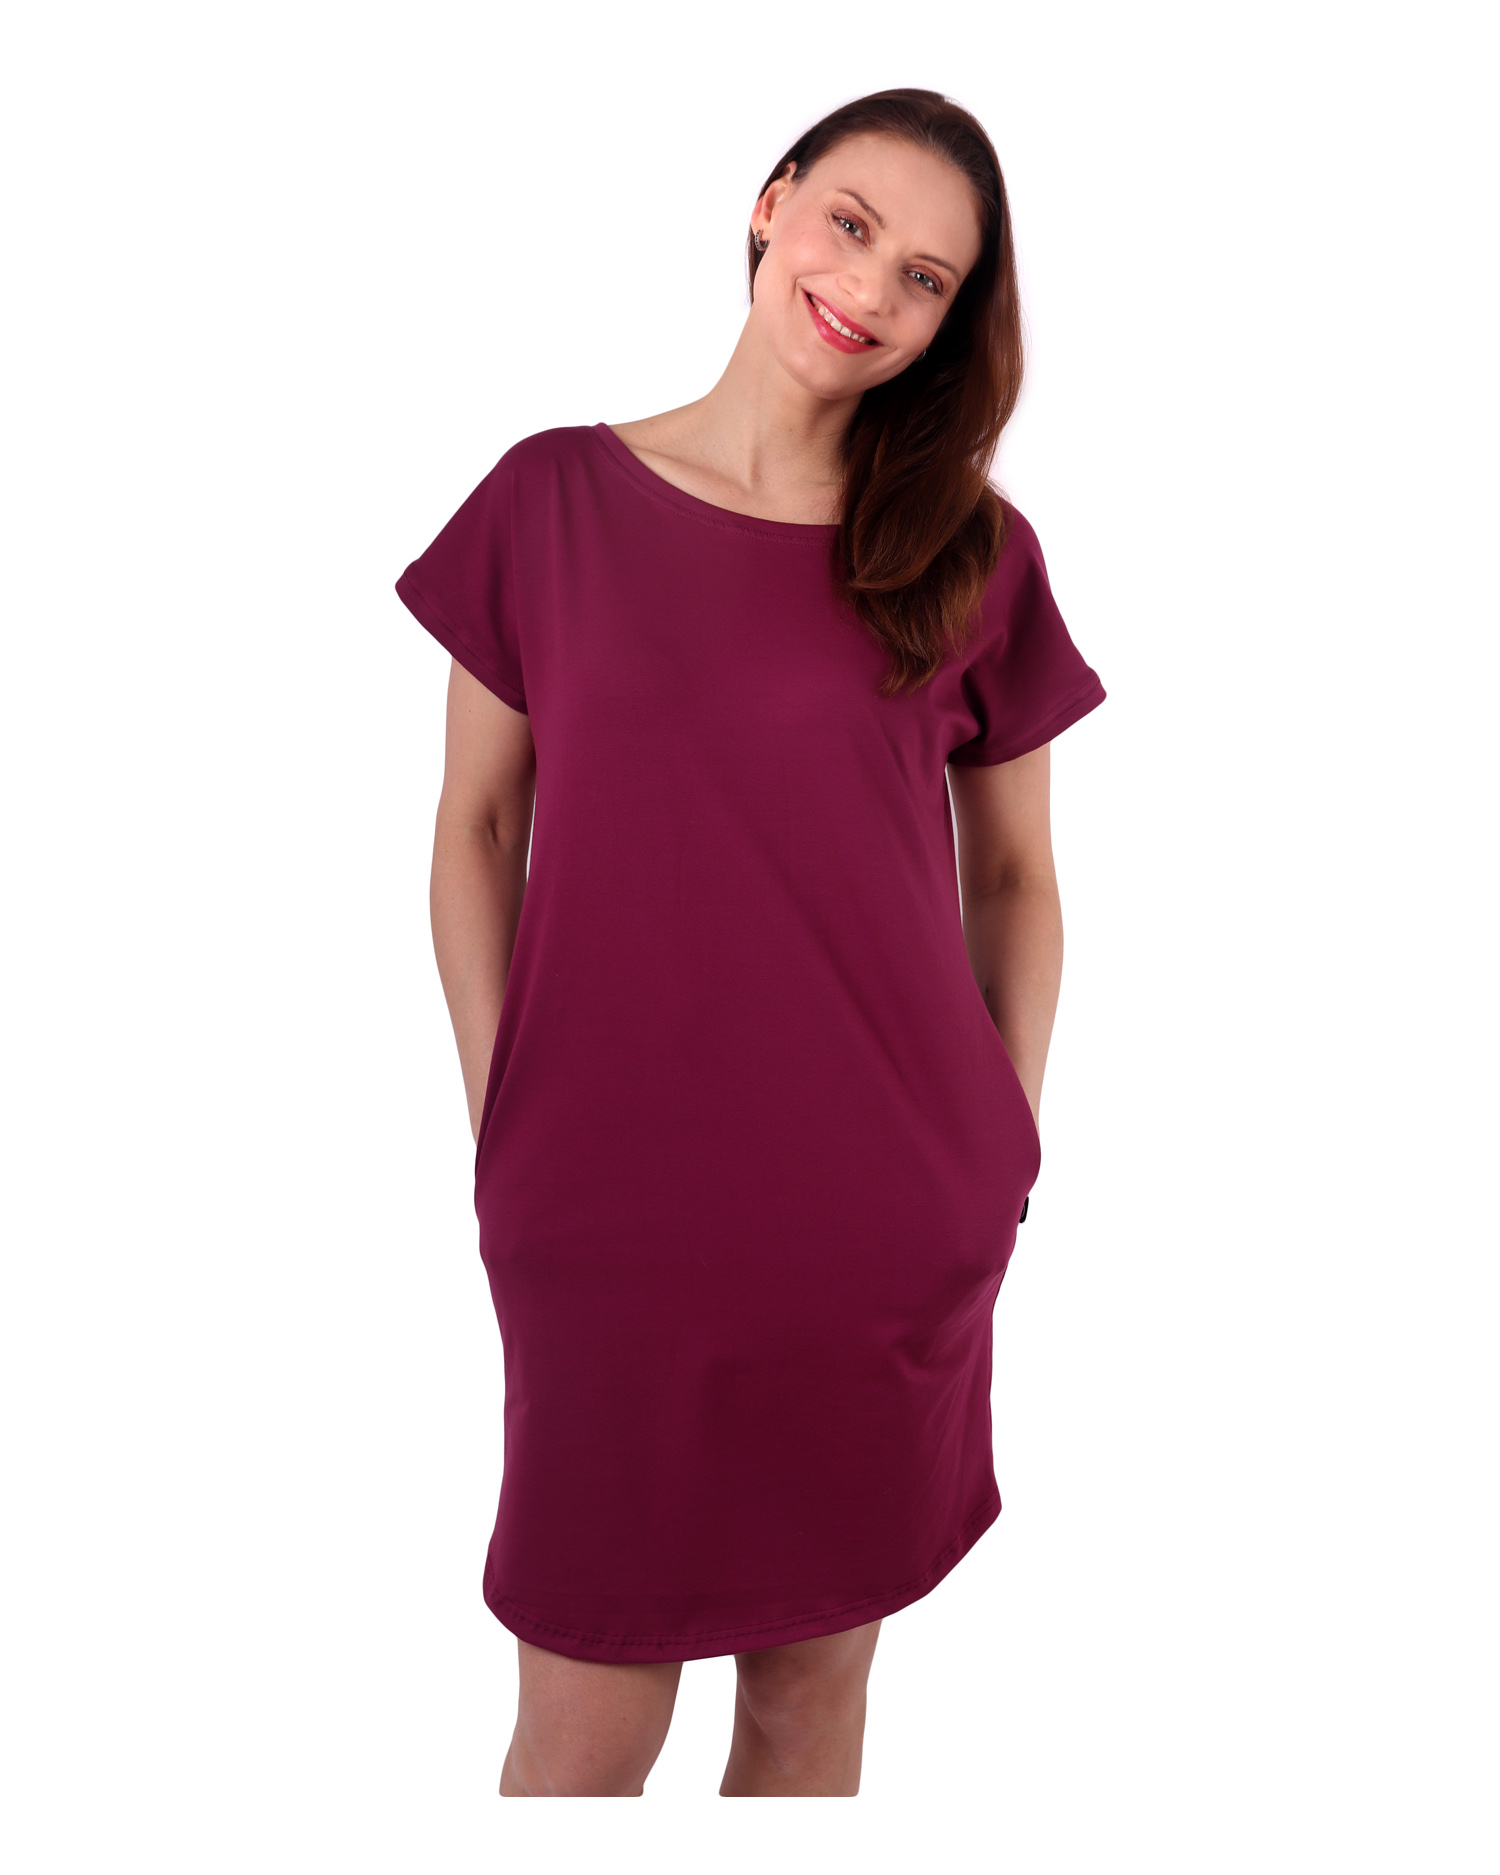 Women's dress with pockets Olivia, loose fit, cyclamen